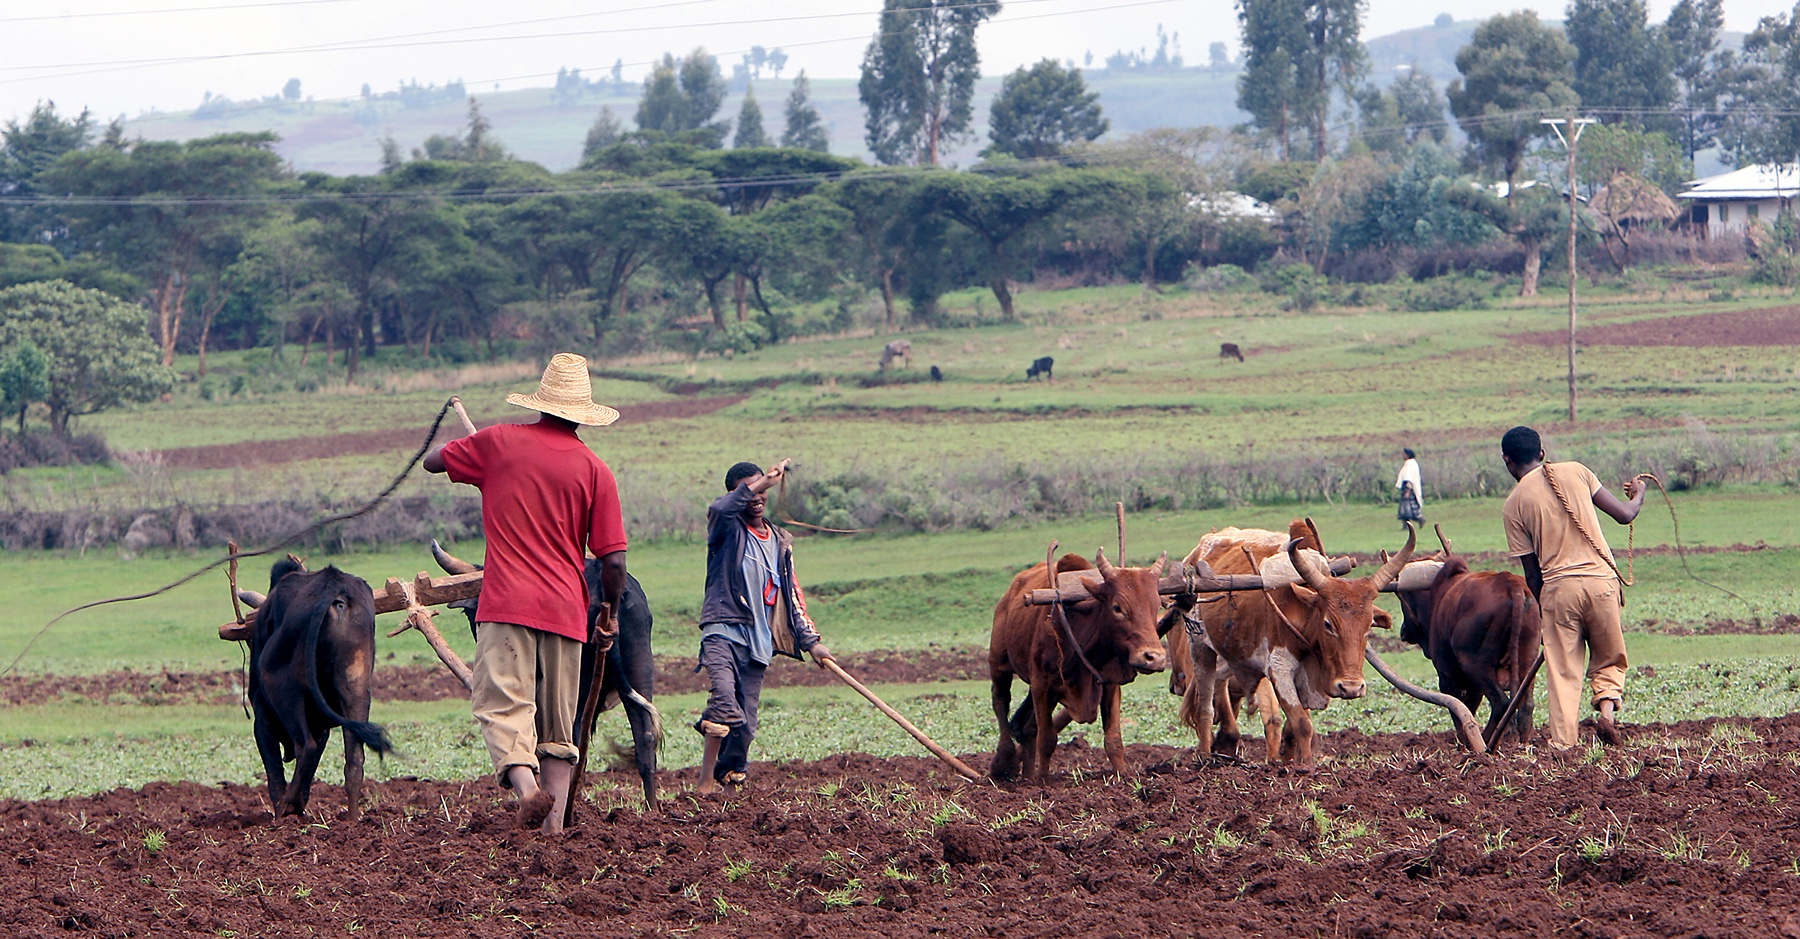 Farmers at work in a field in Ethiopia 